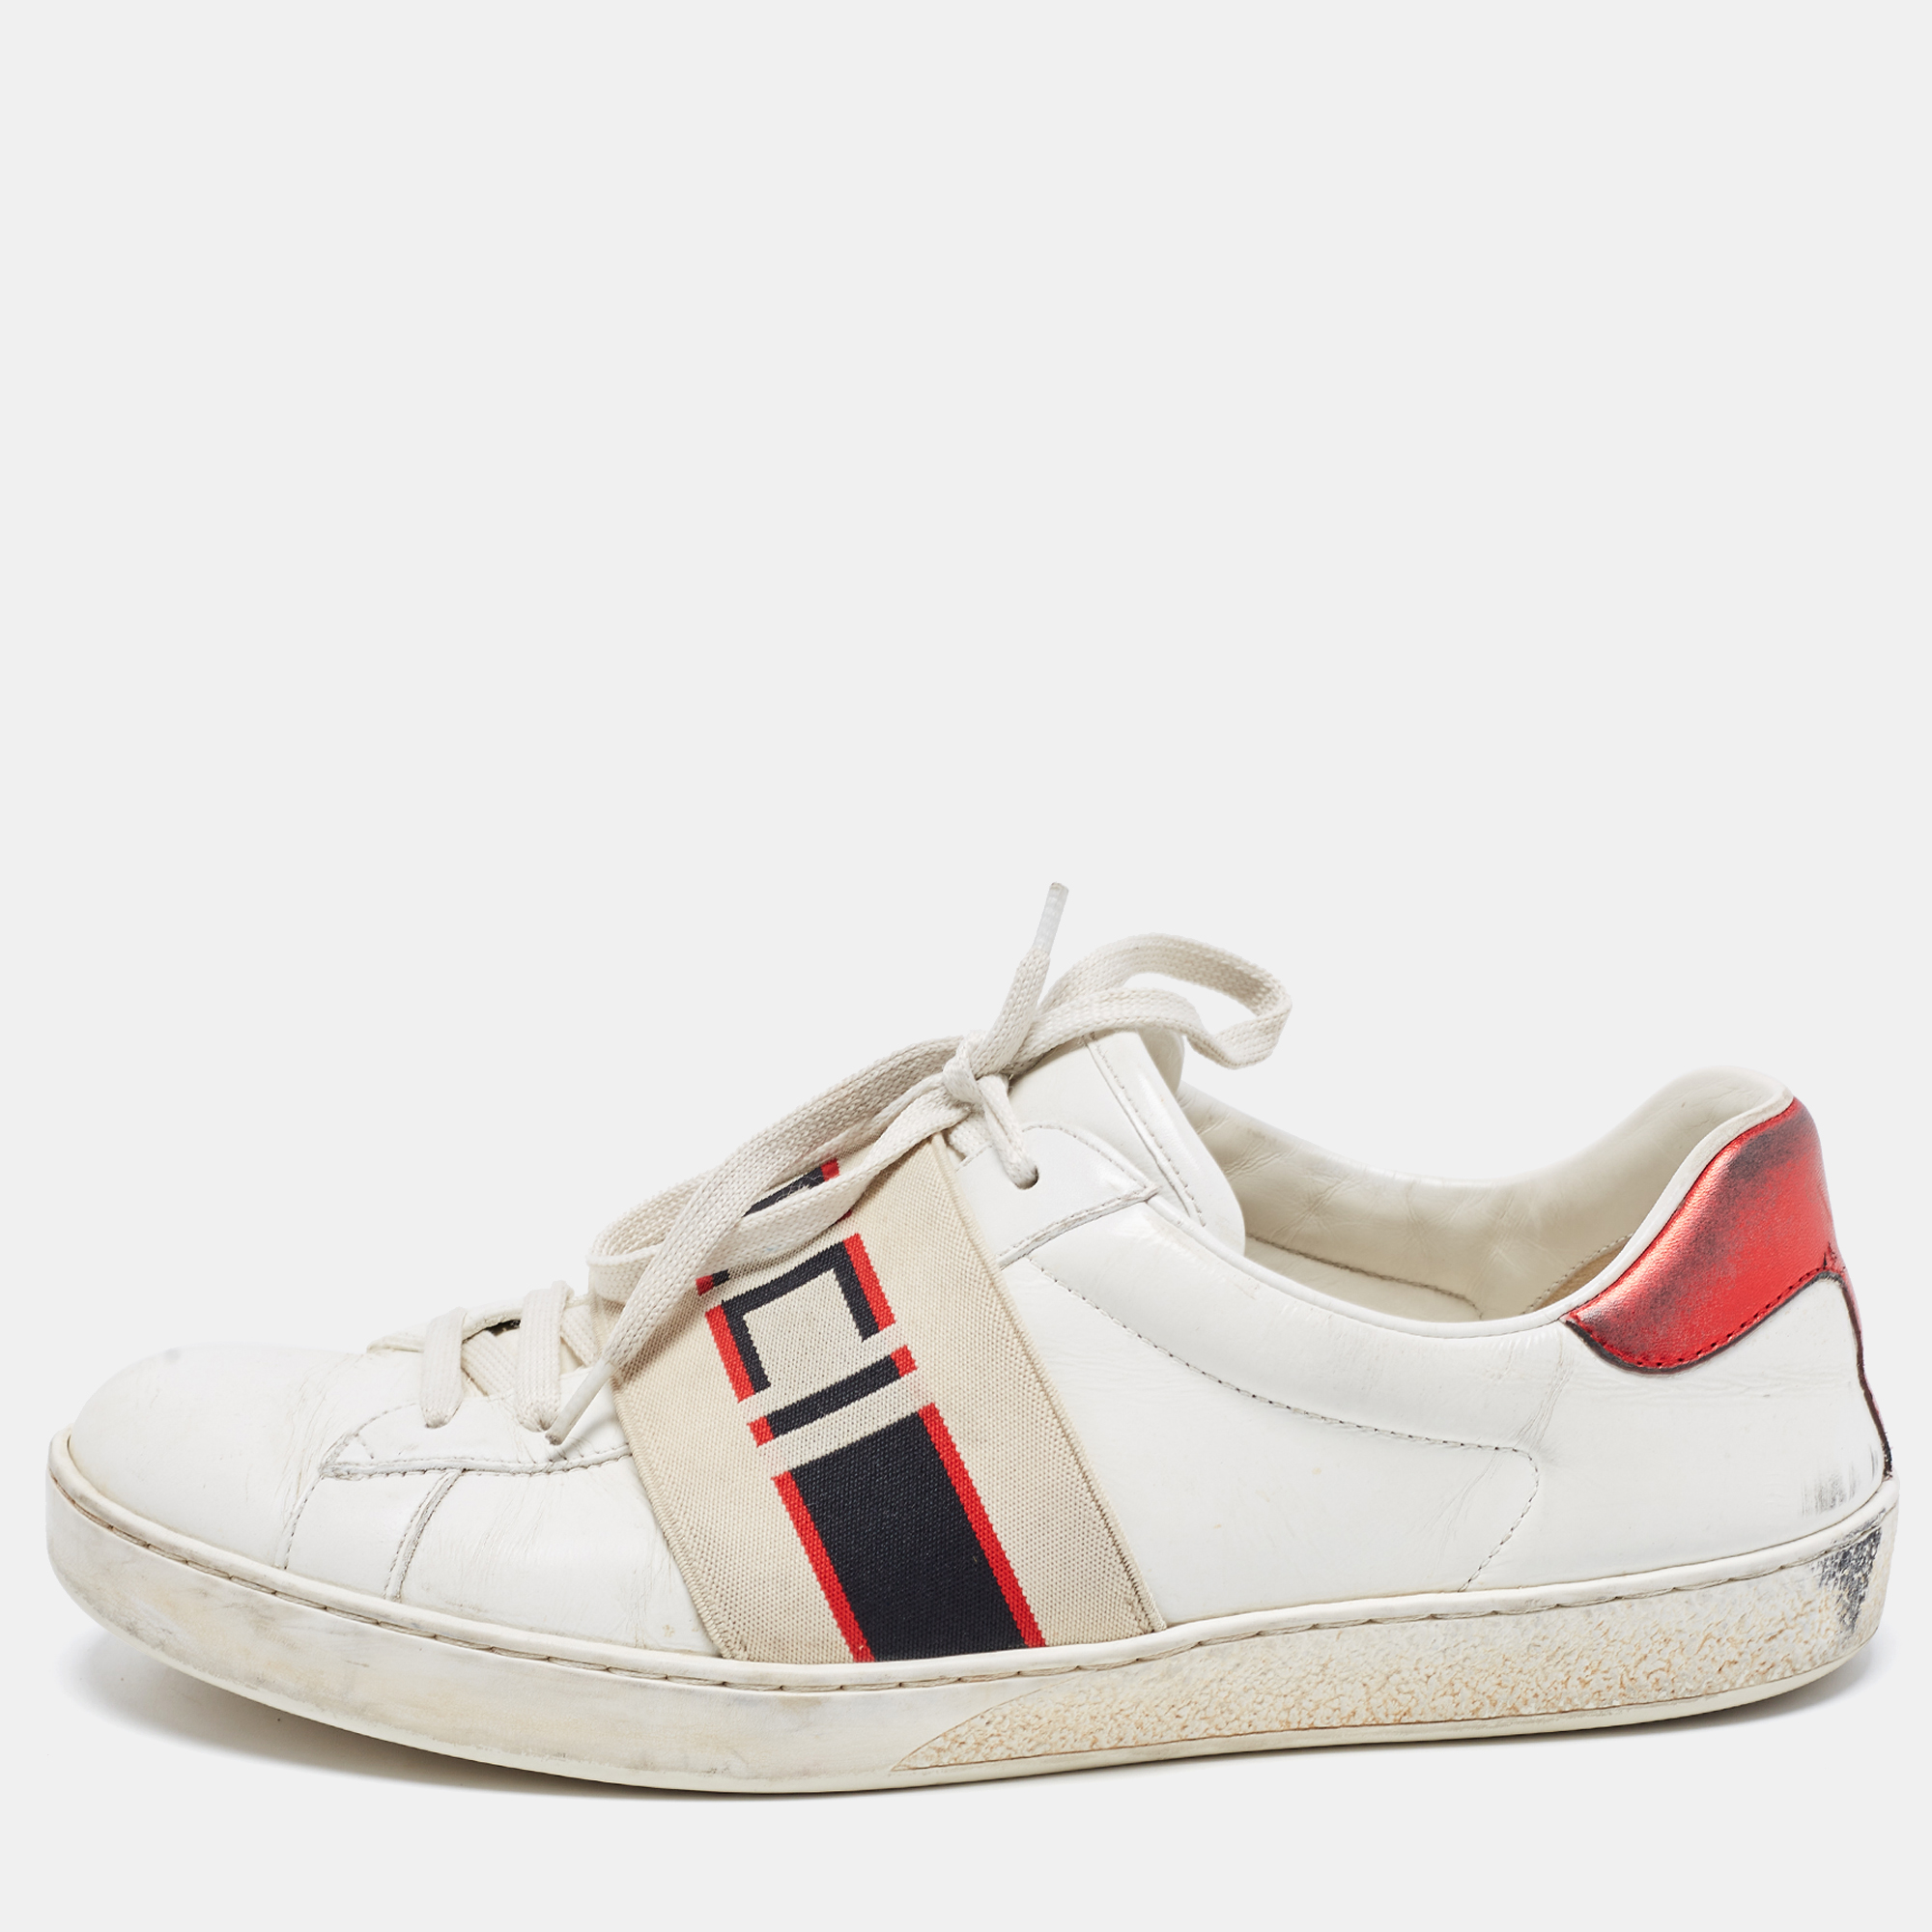 Pre-owned Gucci White Leather Logo Band Ace Sneakers Size 41.5